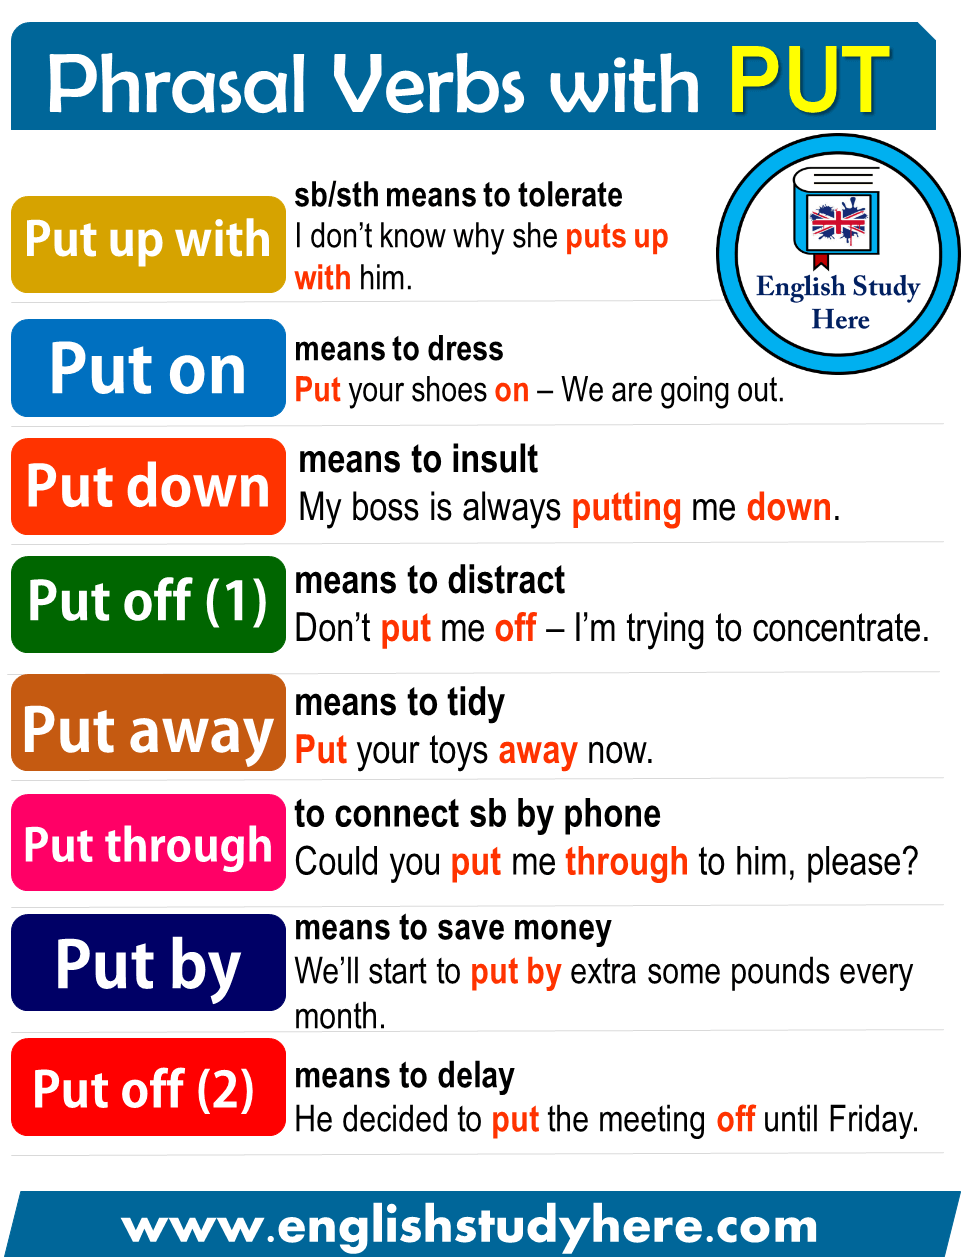 Phrasal Verbs with PUT in English